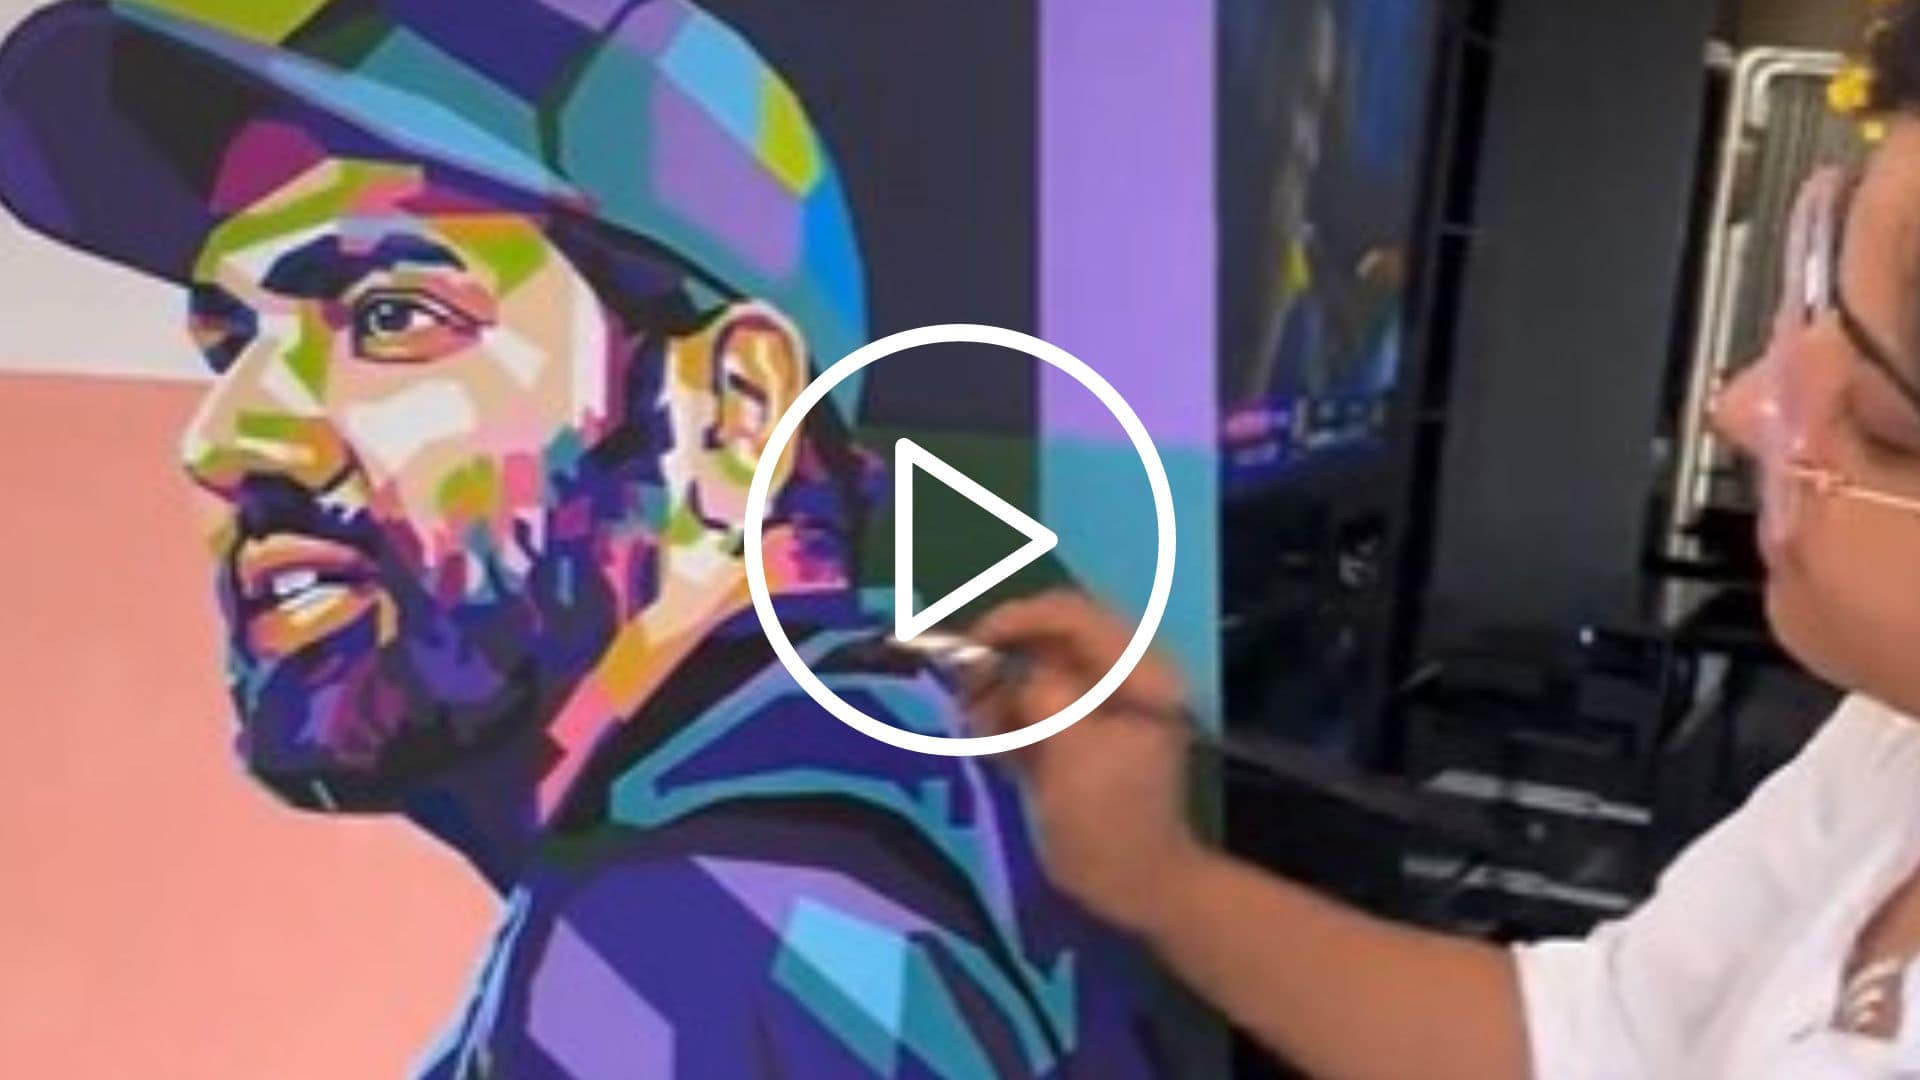 [Watch] Rohit Sharma's Artistic And A Beautiful Sketch By His Lady Fan